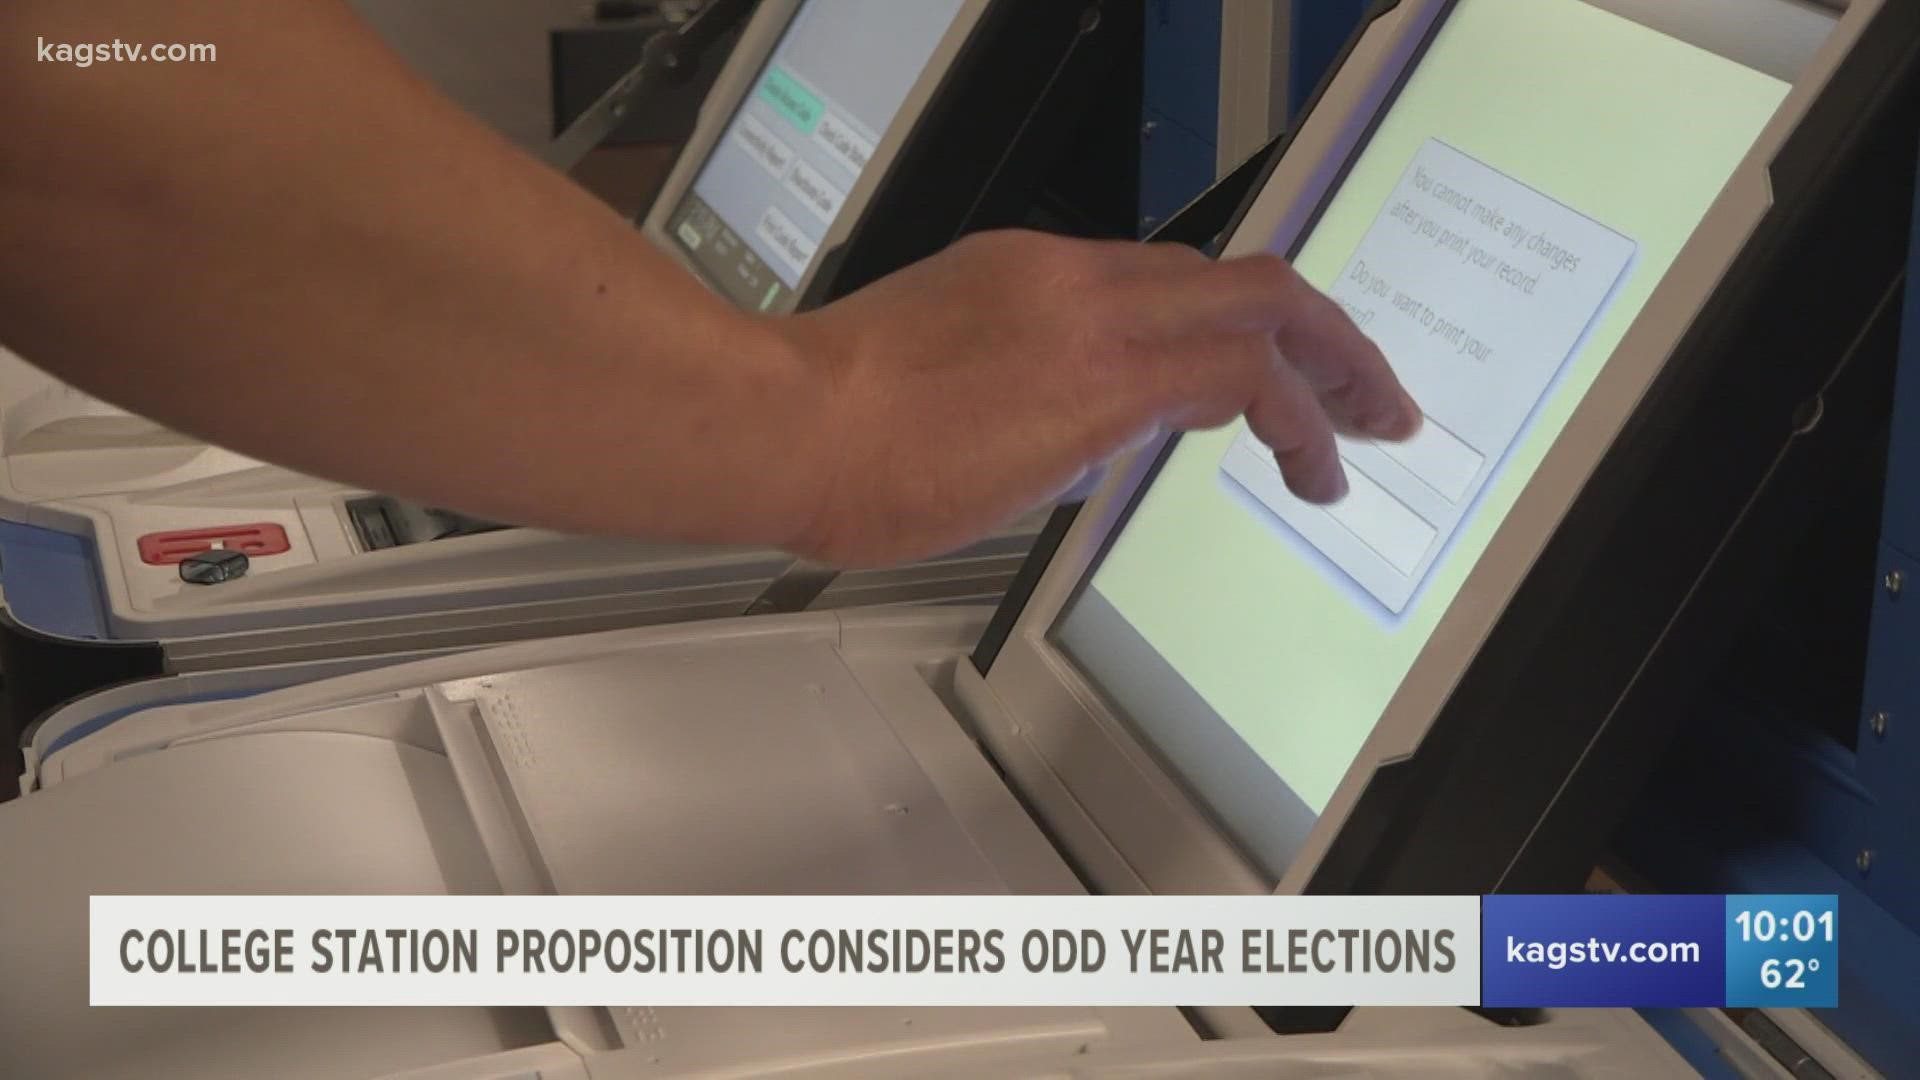 Council members said if Proposition C passes it will move city elections to odd years.